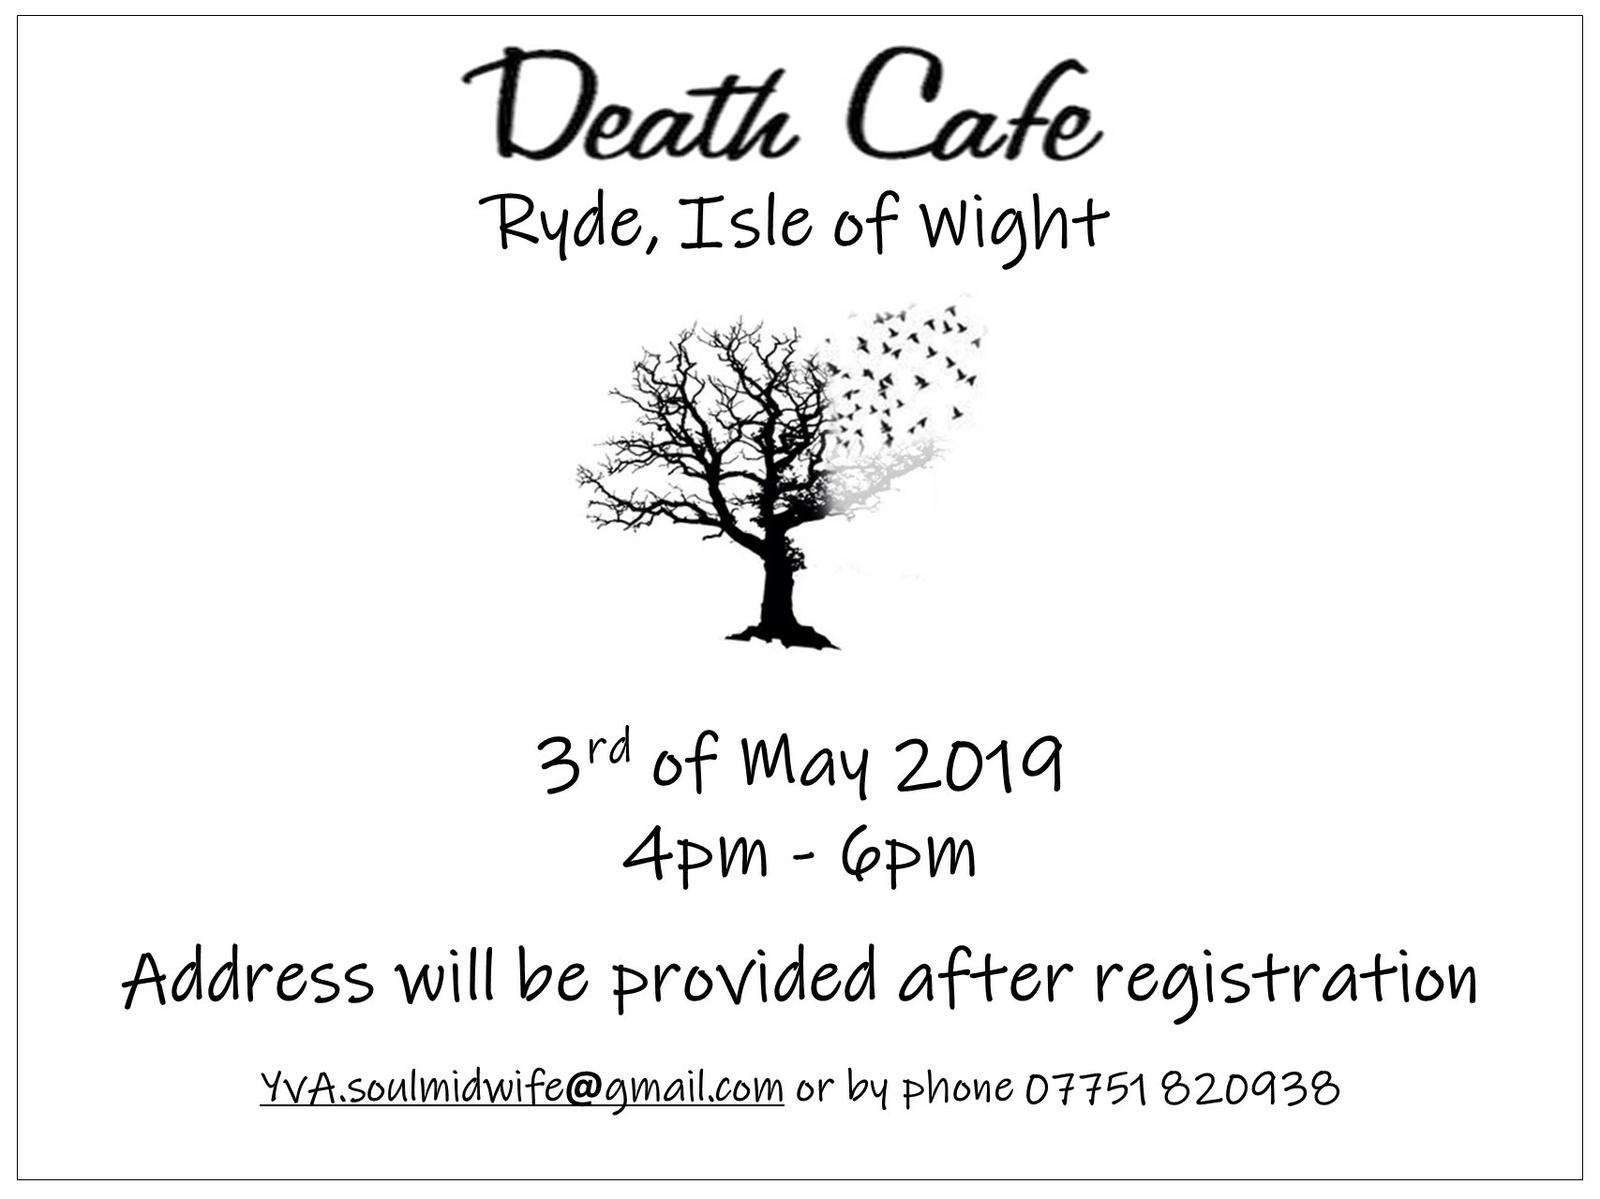 Death Cafe Ryde, Isle of Wight